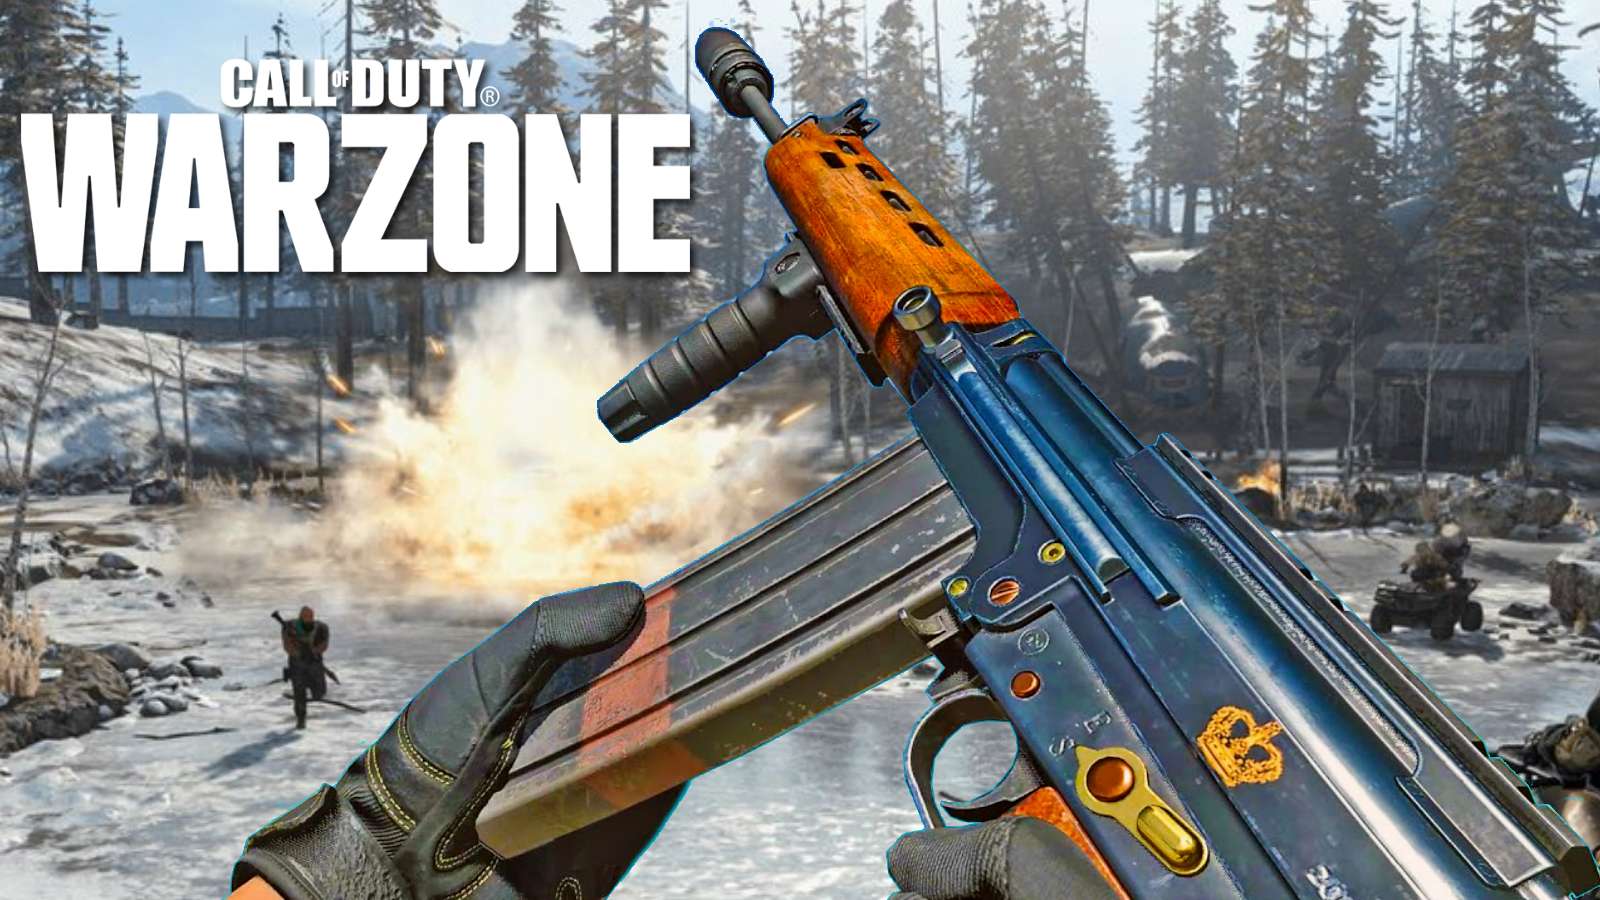 FAL in Warzone being reloaded